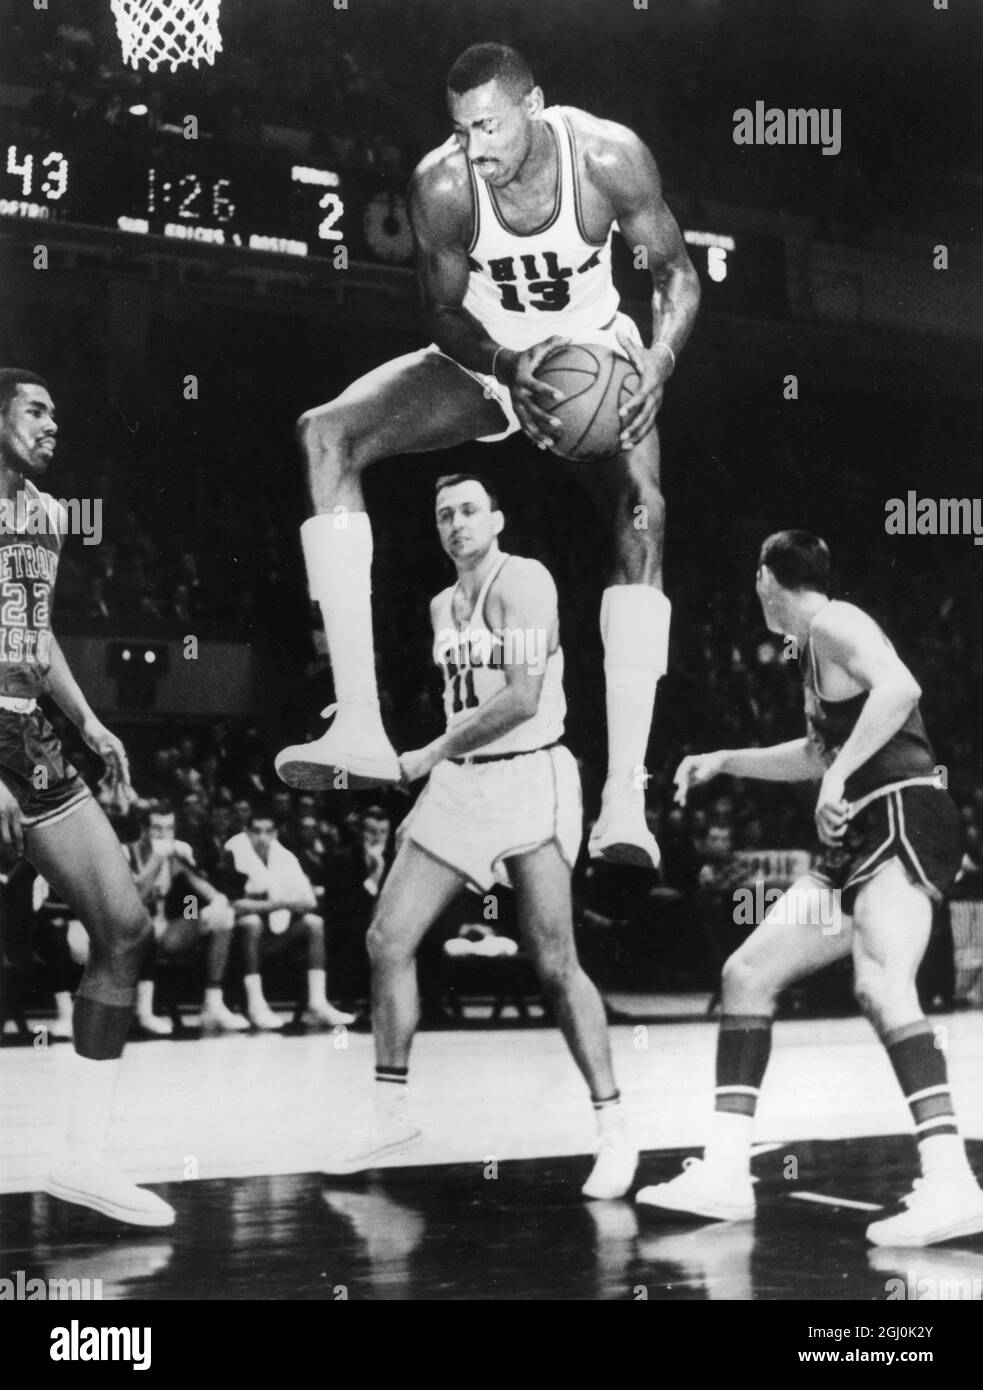 Old Wilt Chamberlain Photo With Strange Optical Illusion Pants Will Boggle  Your Mind